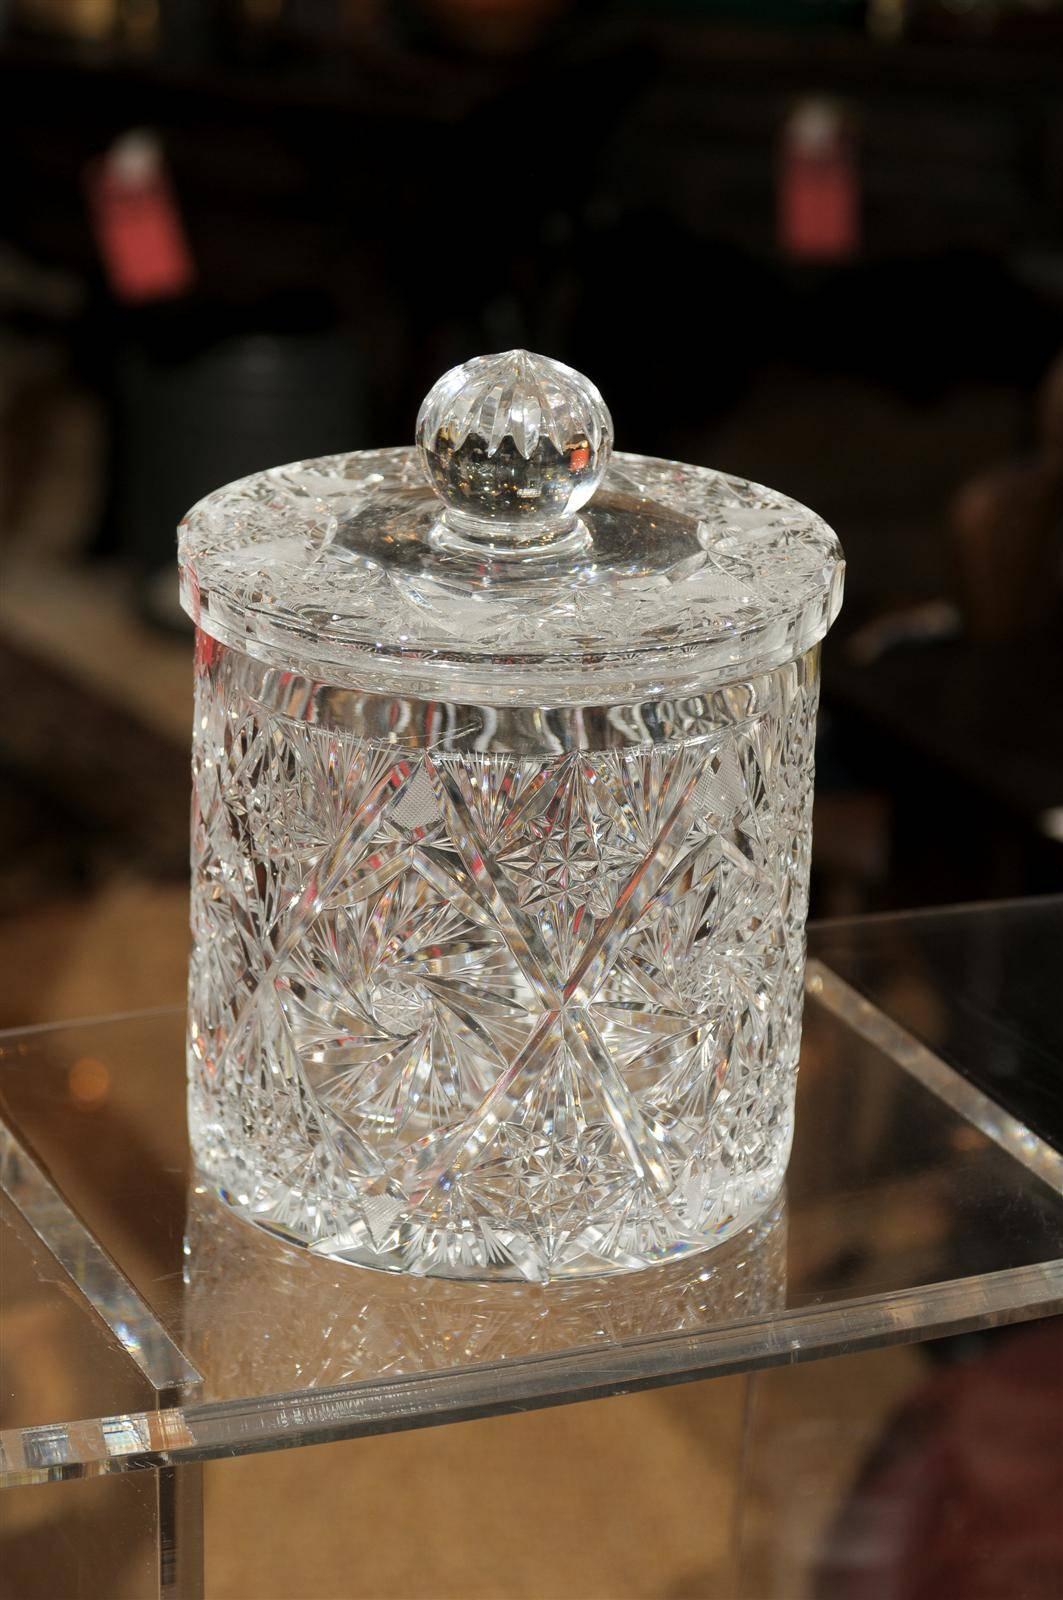 20th century fine quality container of hand-cut and etched glass with the original lid. Can be used as an ice bucket or candy dish.